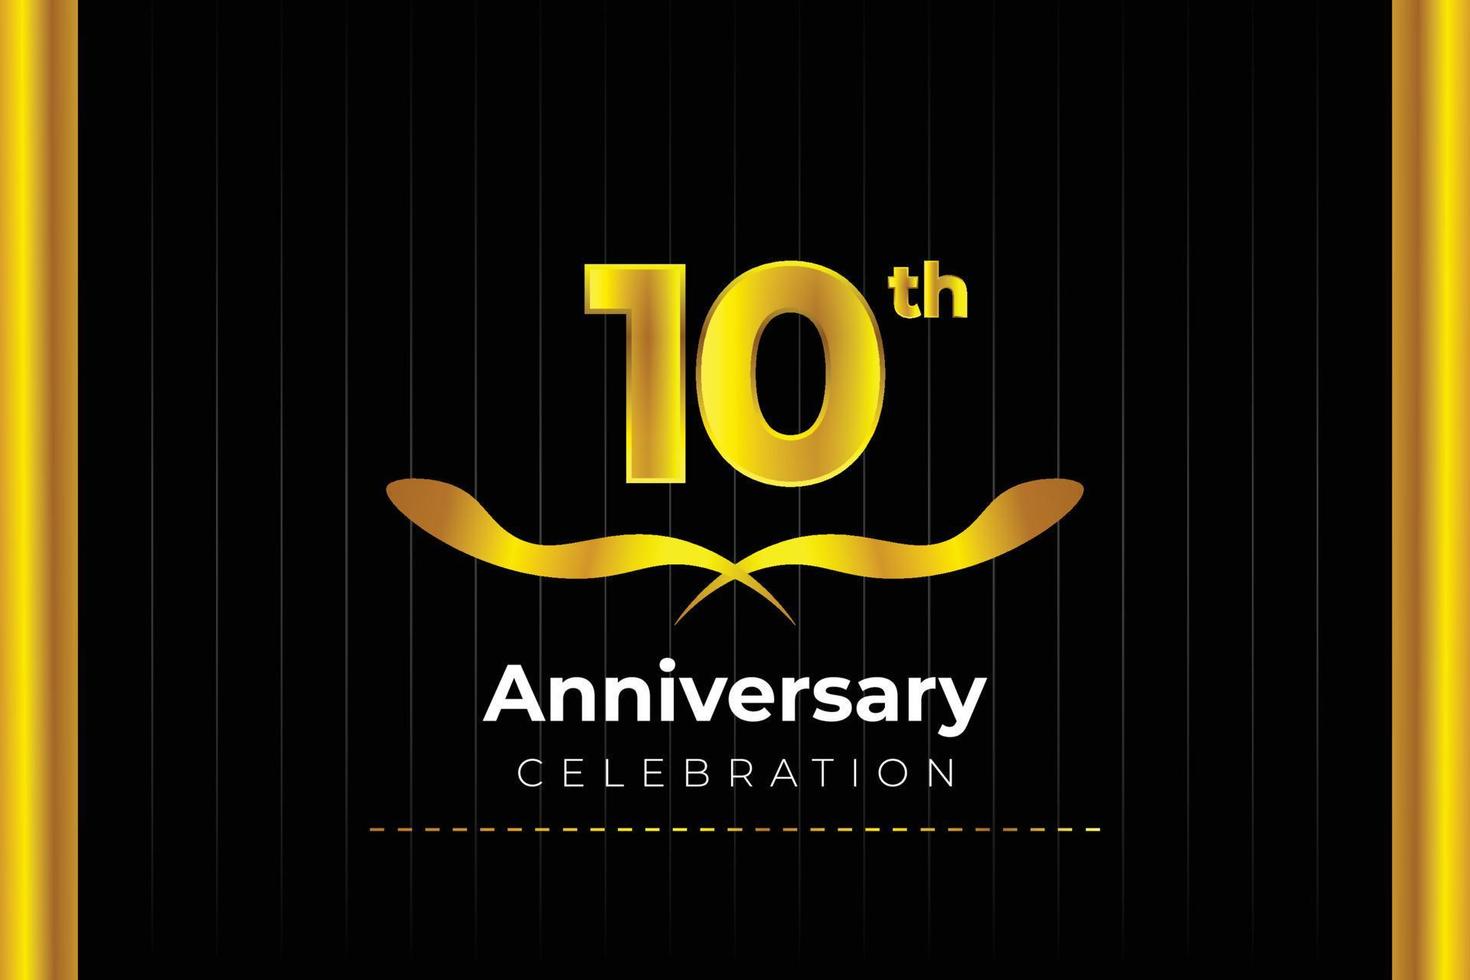 10th Anniversary Celebration design with creative background concept. vector